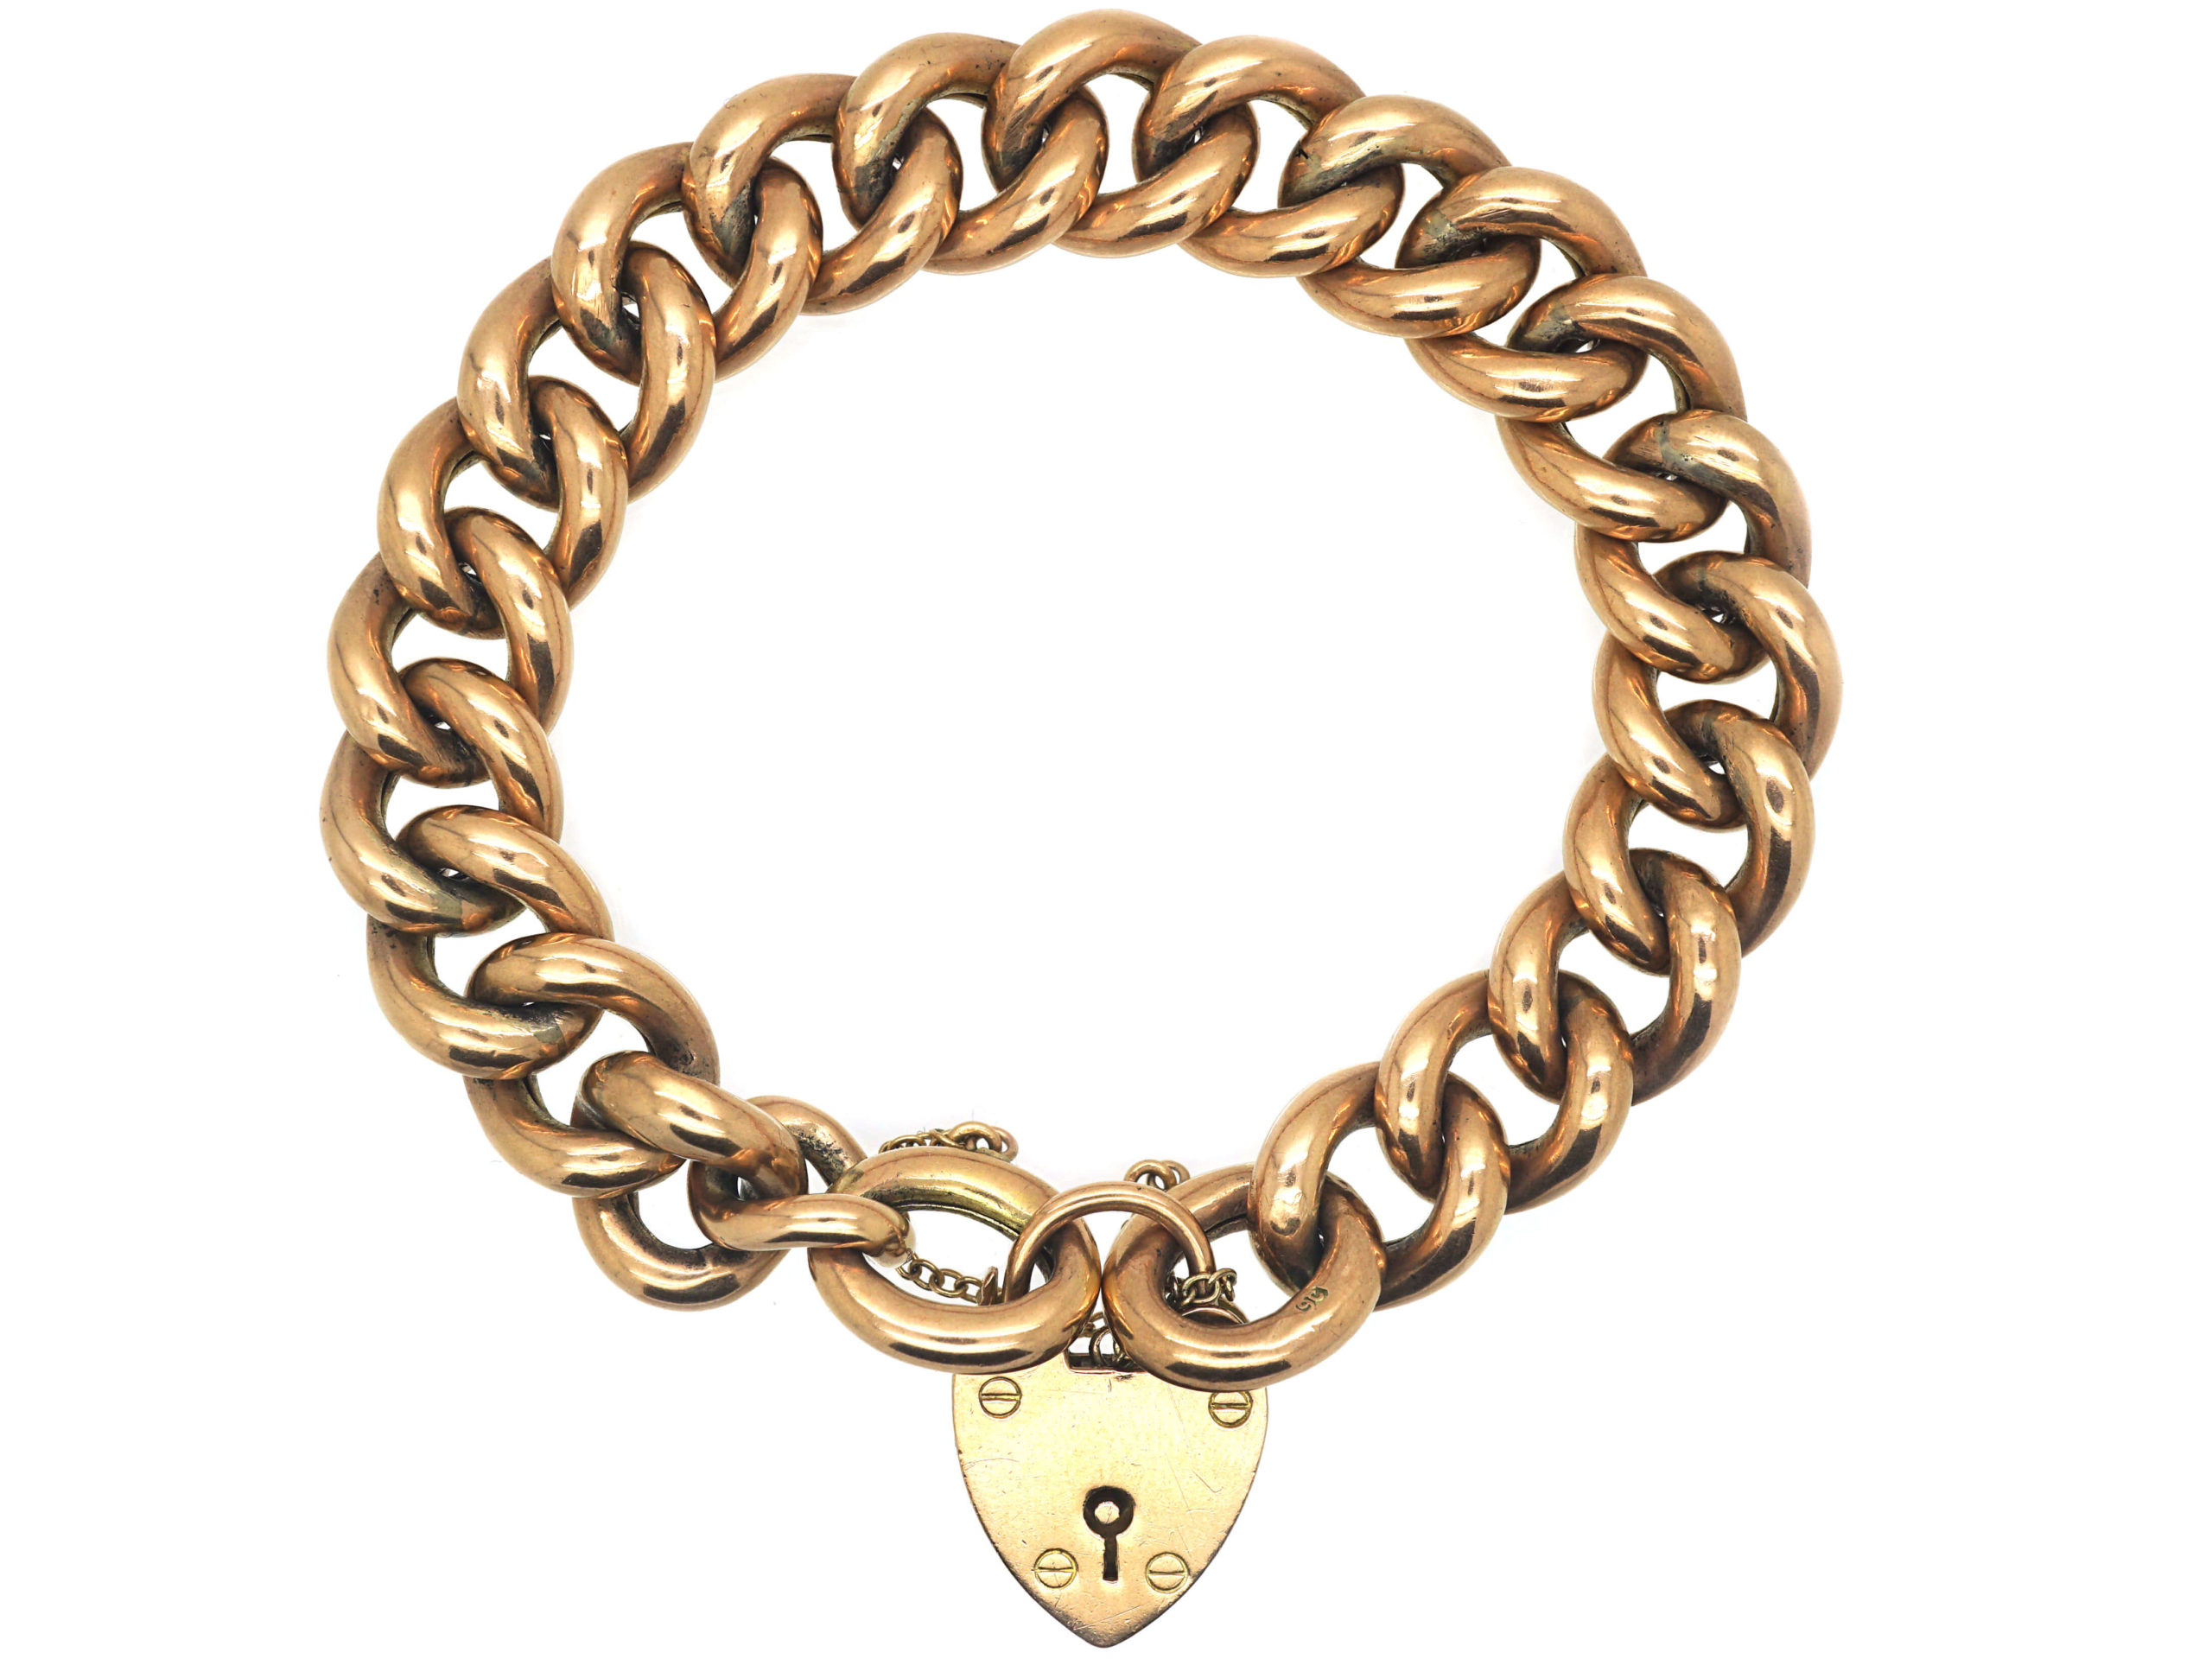 Edwardian 9ct Gold Curb Bracelet (617N) | The Antique Jewellery Company